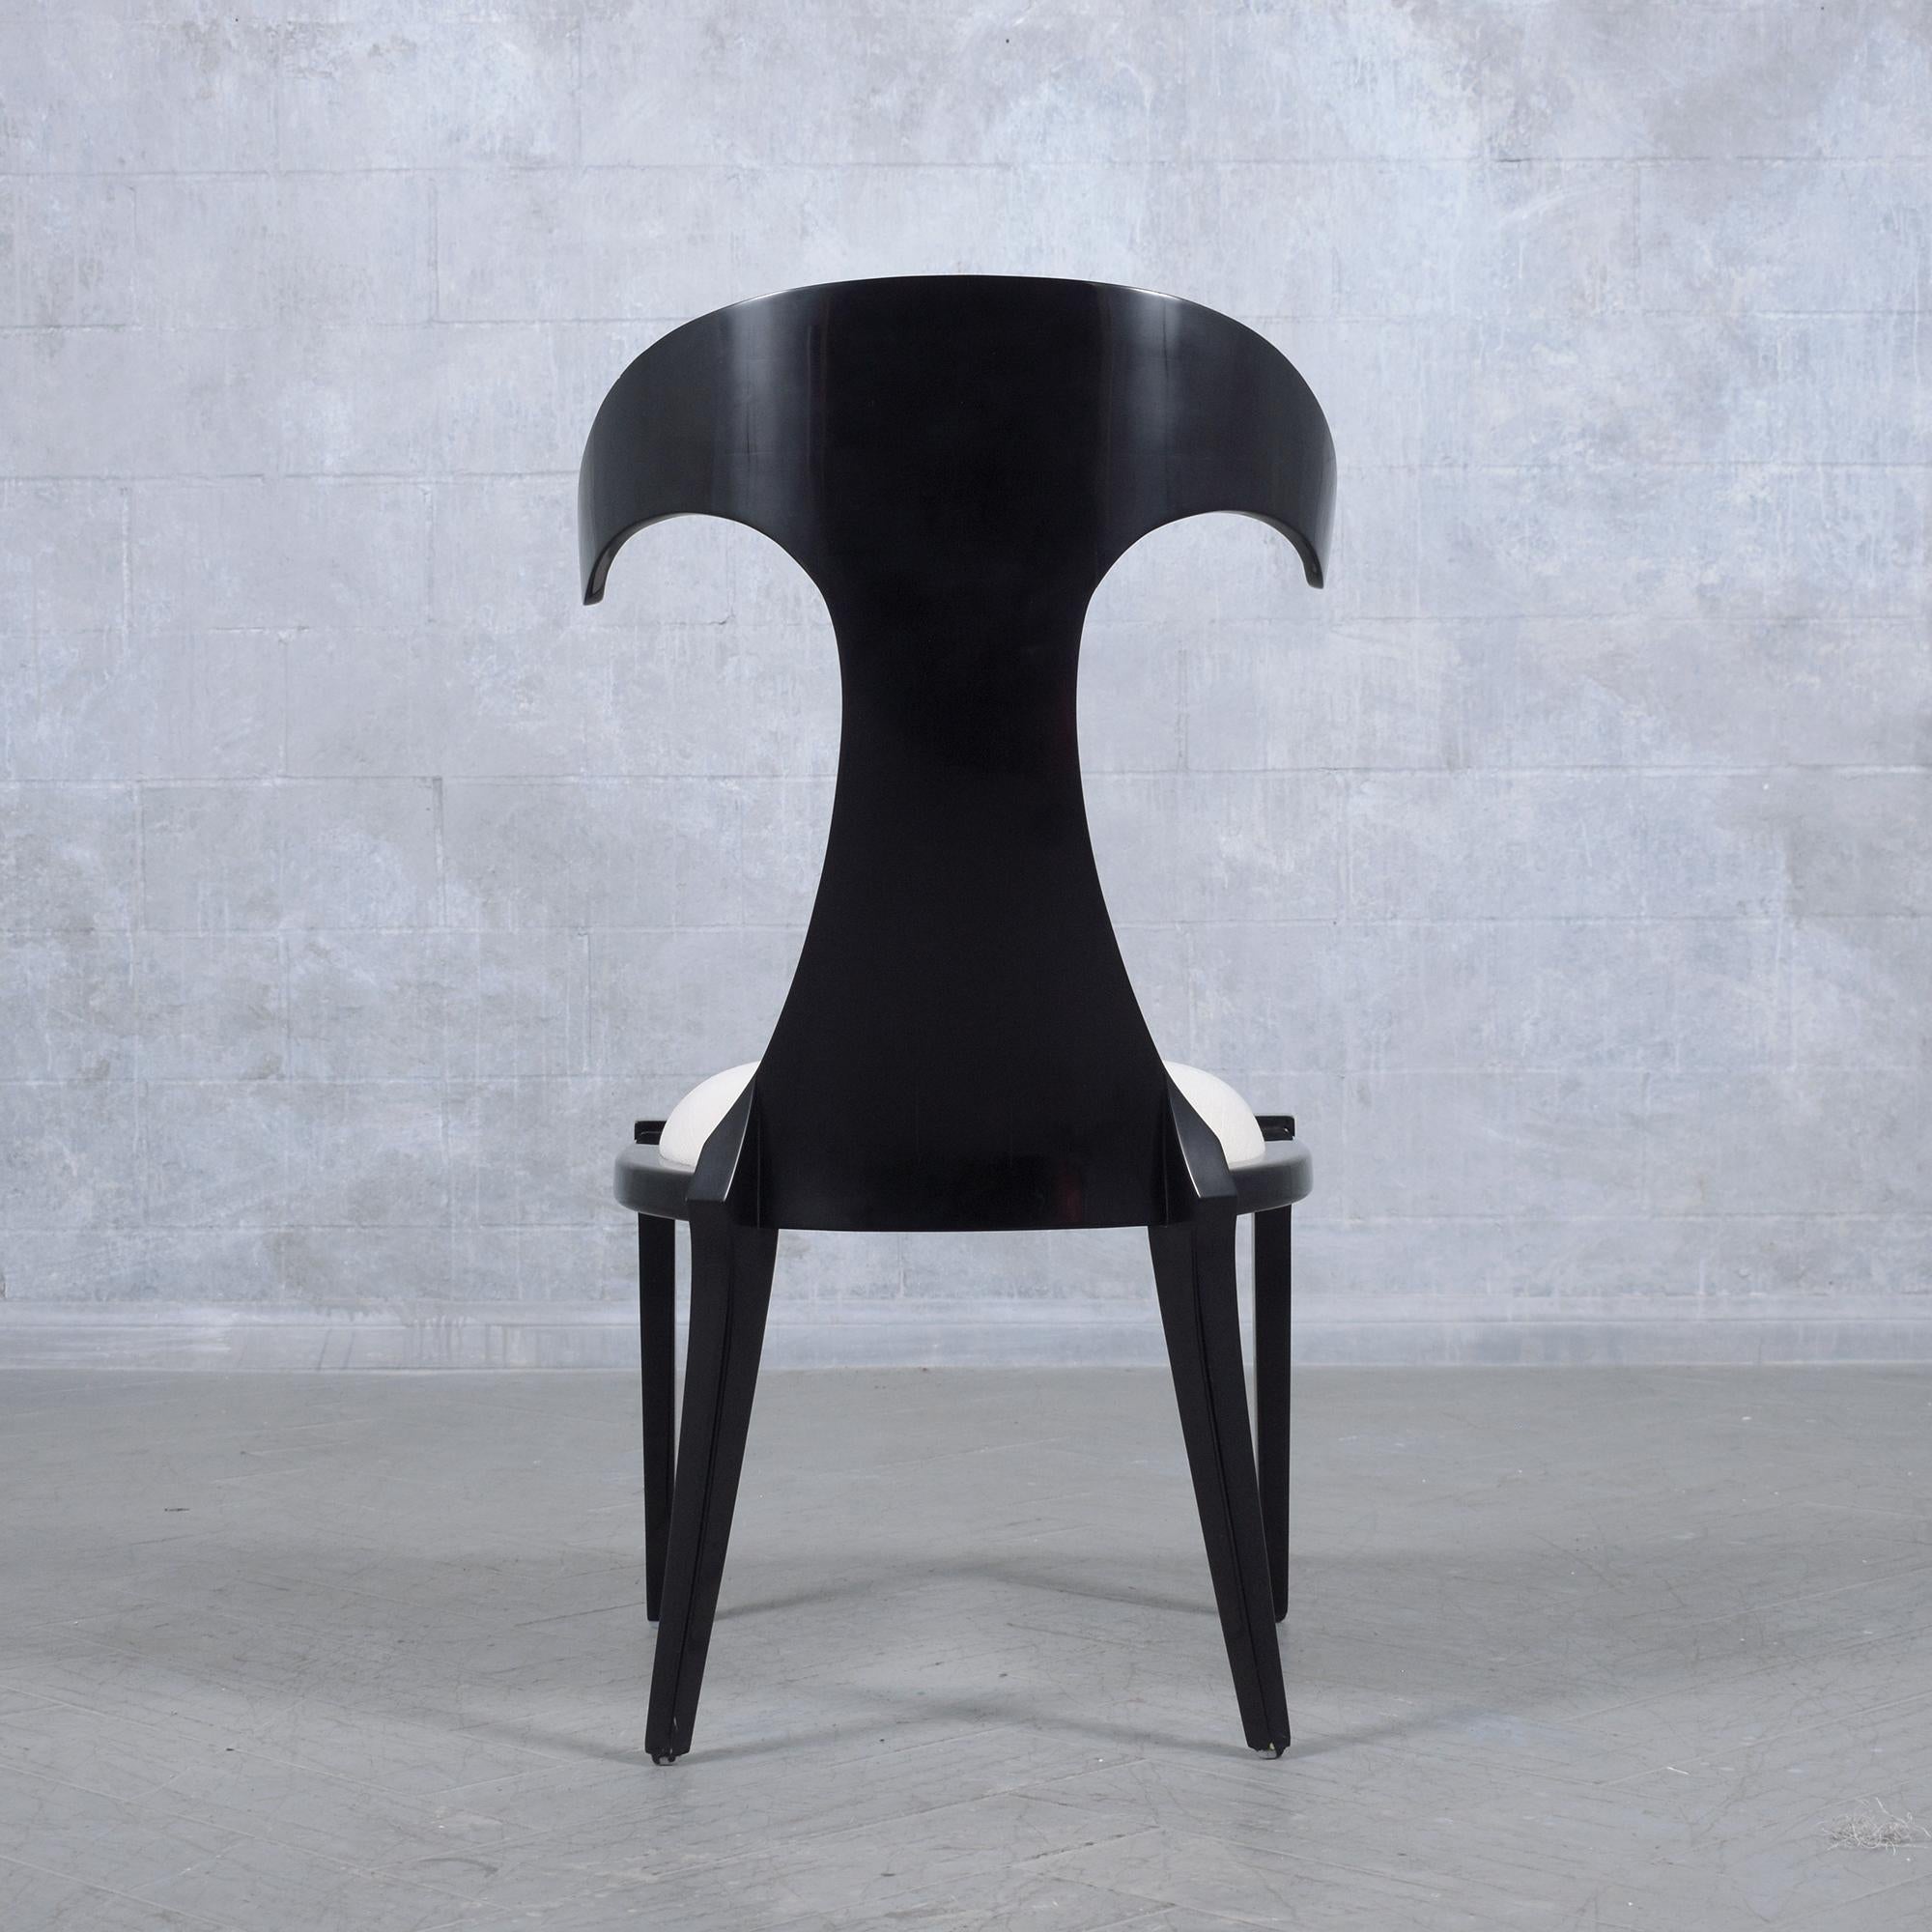 Ebonized Modernism Side Chair: Refinished Bent Wood with High Backrest Design In Good Condition For Sale In Los Angeles, CA